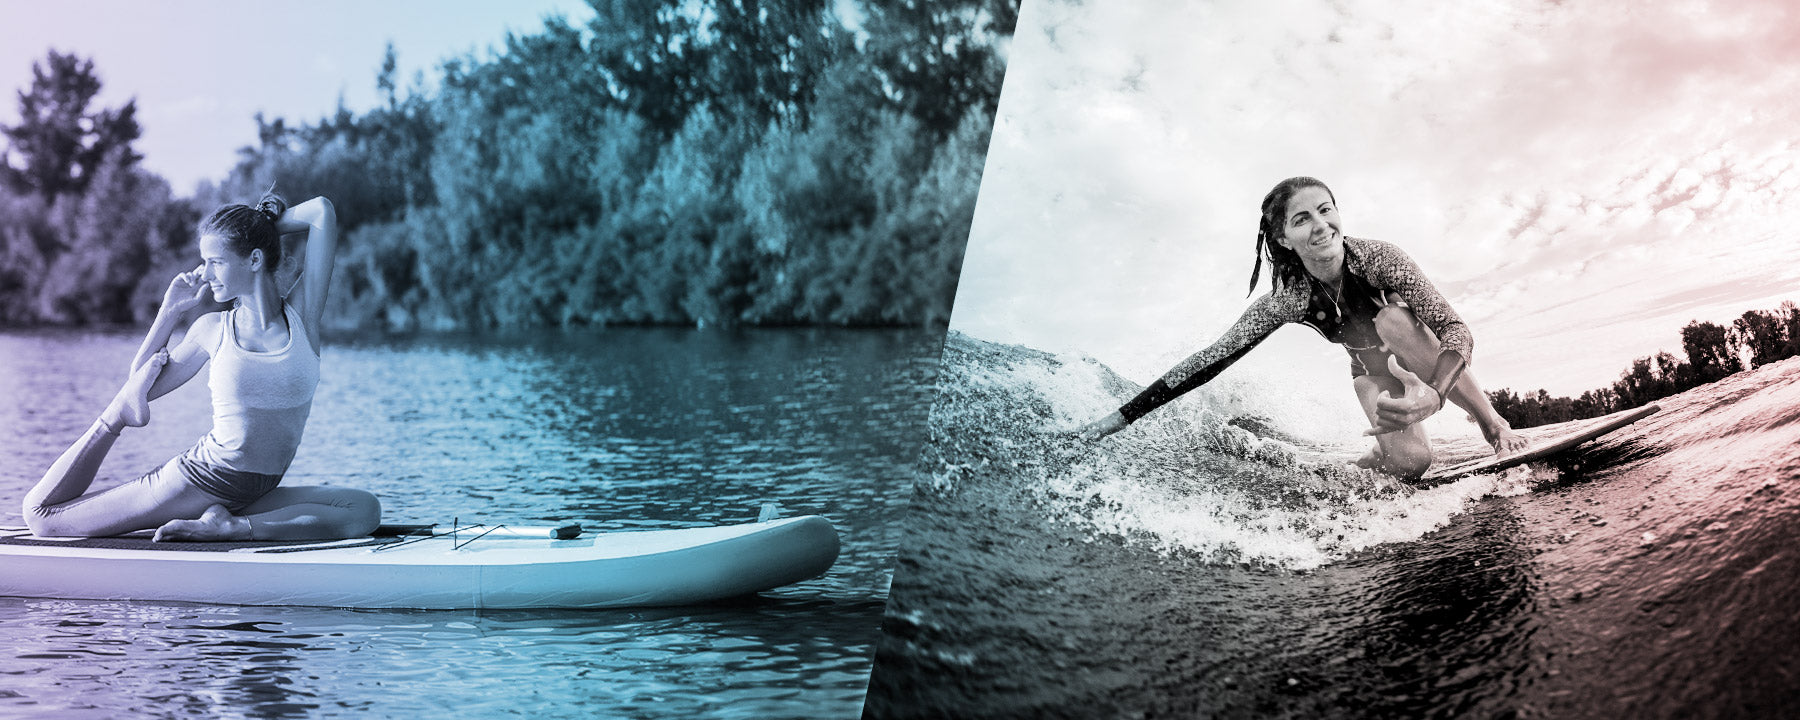 What are the differences between a surfboard and an inflatable SUP? - Turn The Tide, a blog by HeySurf